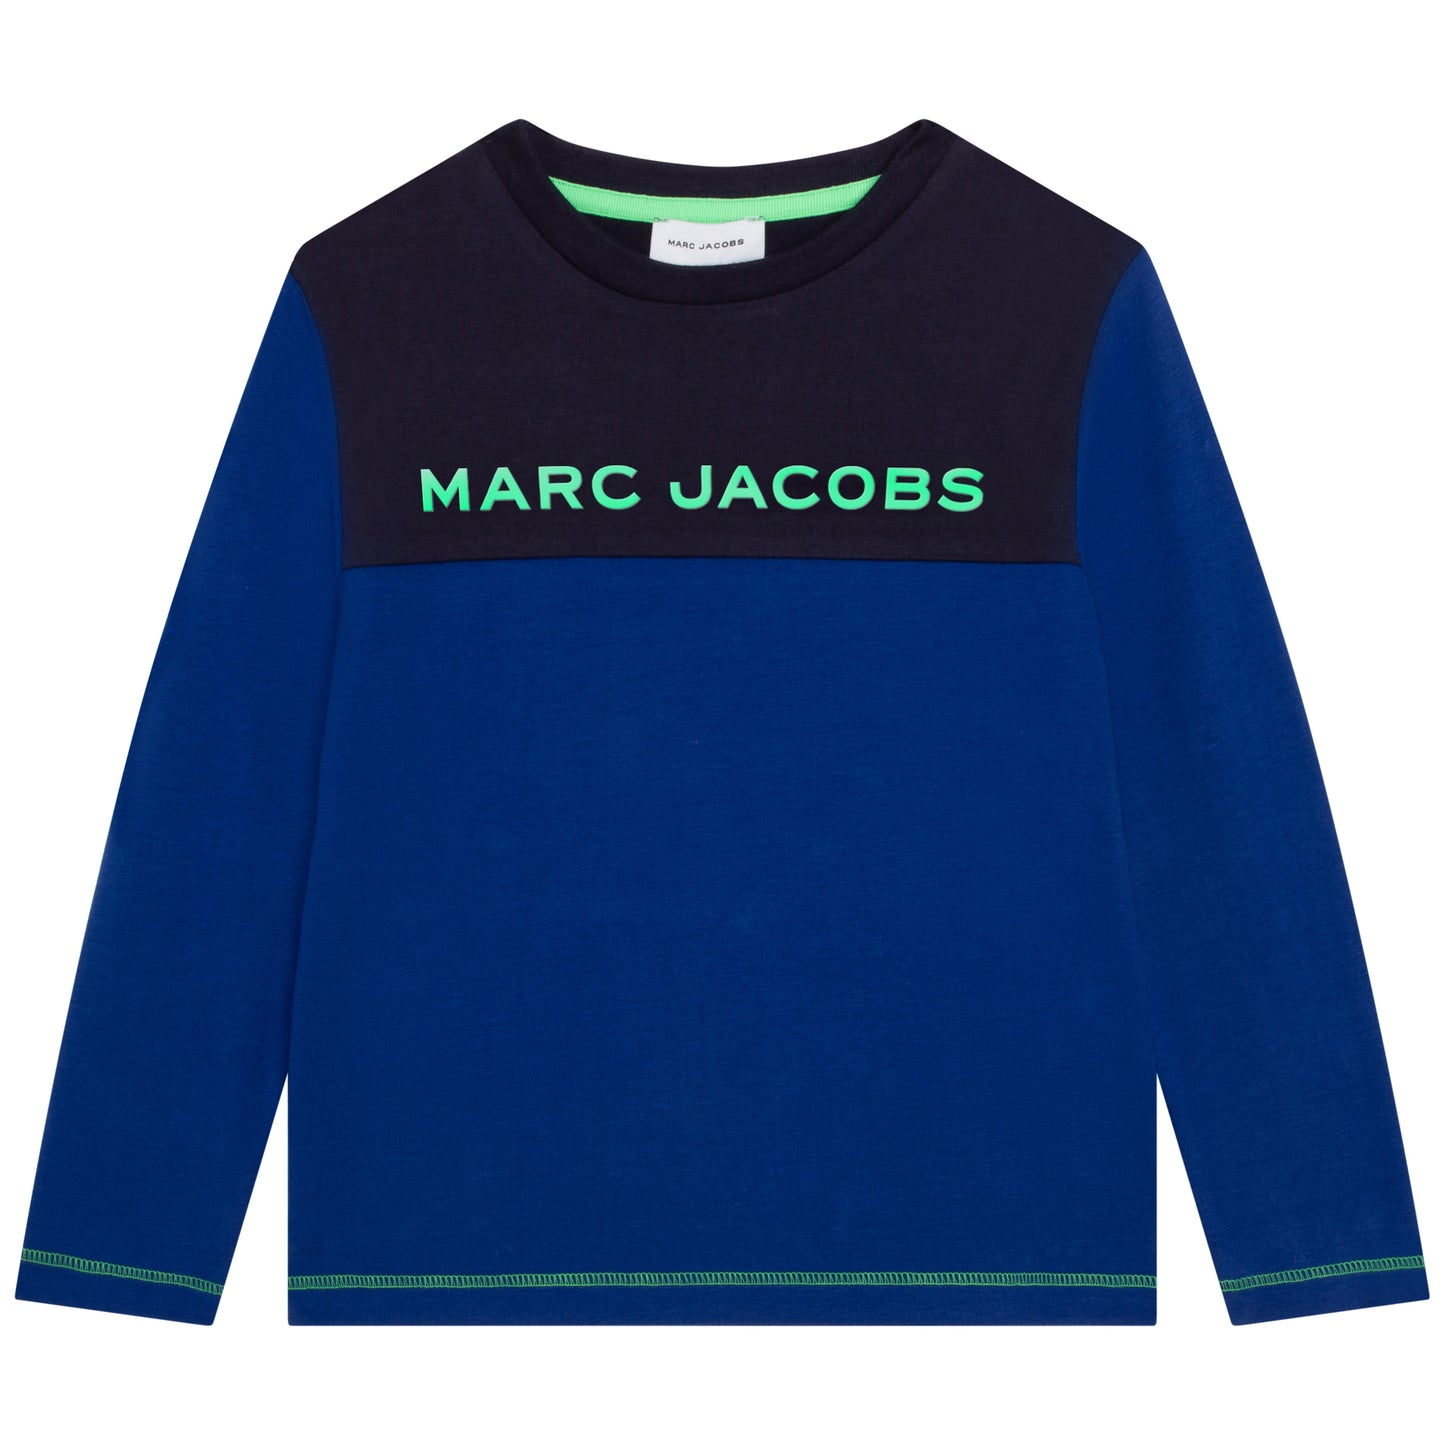 The Marc Jacobs Name T-Shirt